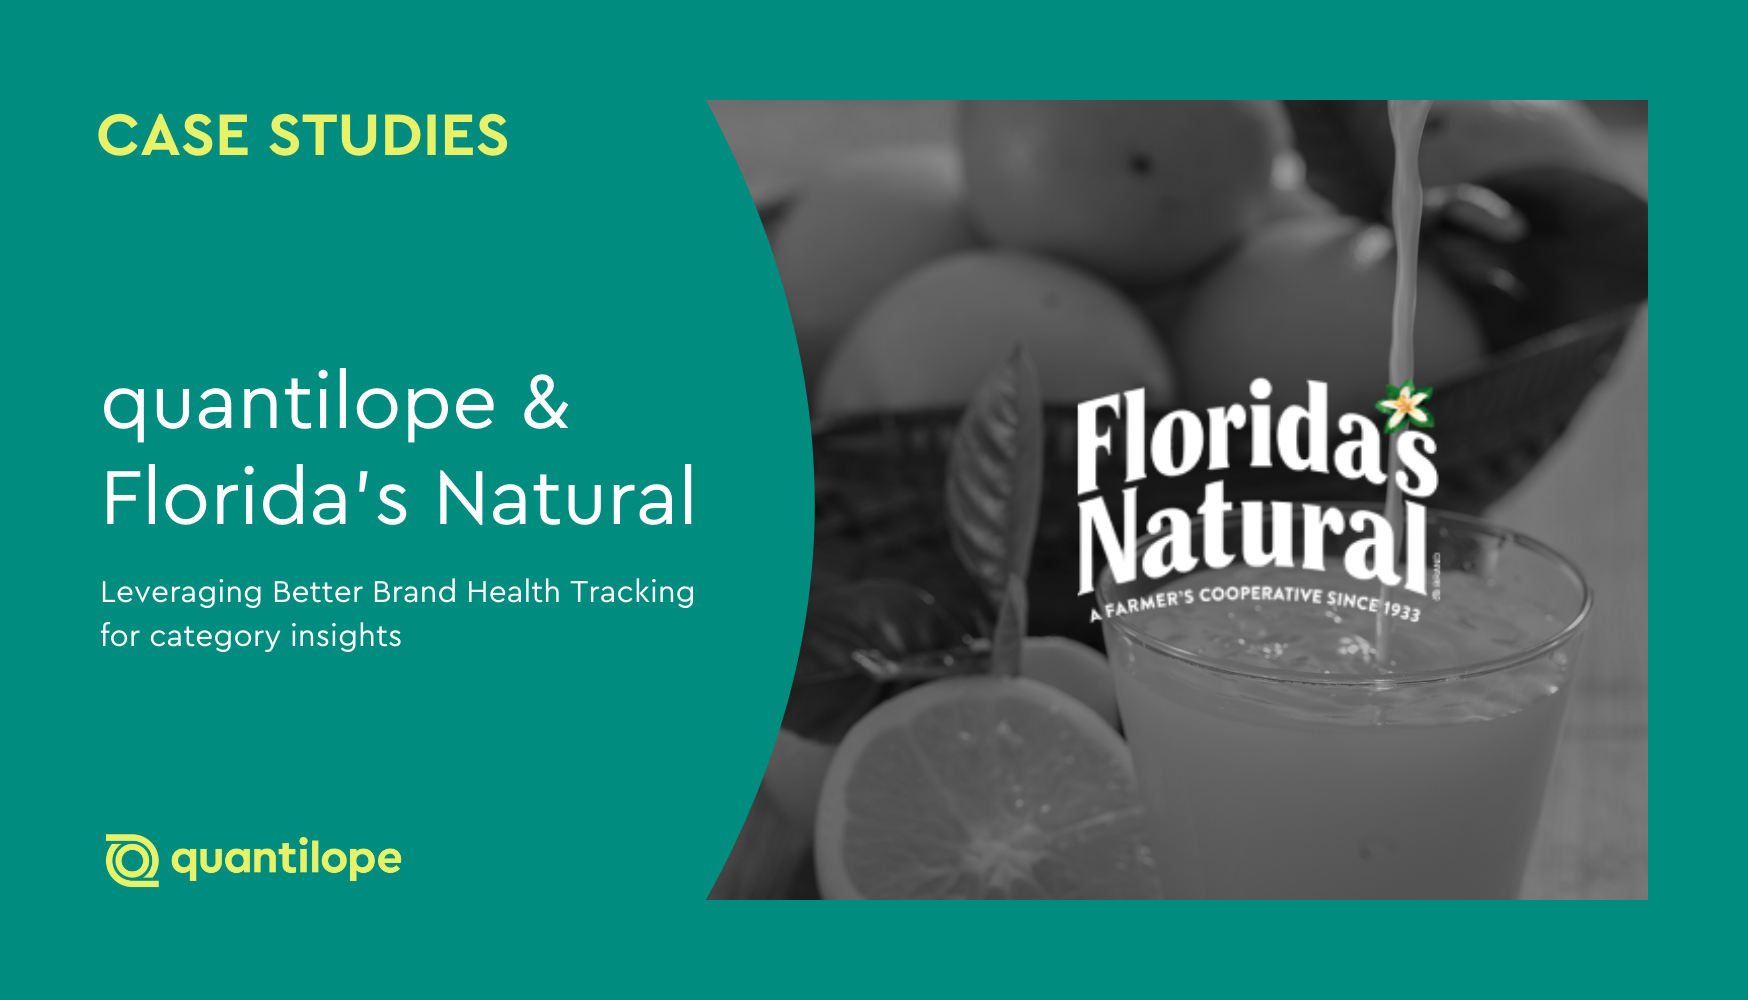 How Florida's Natural Leveraged Better Brand Health Tracking